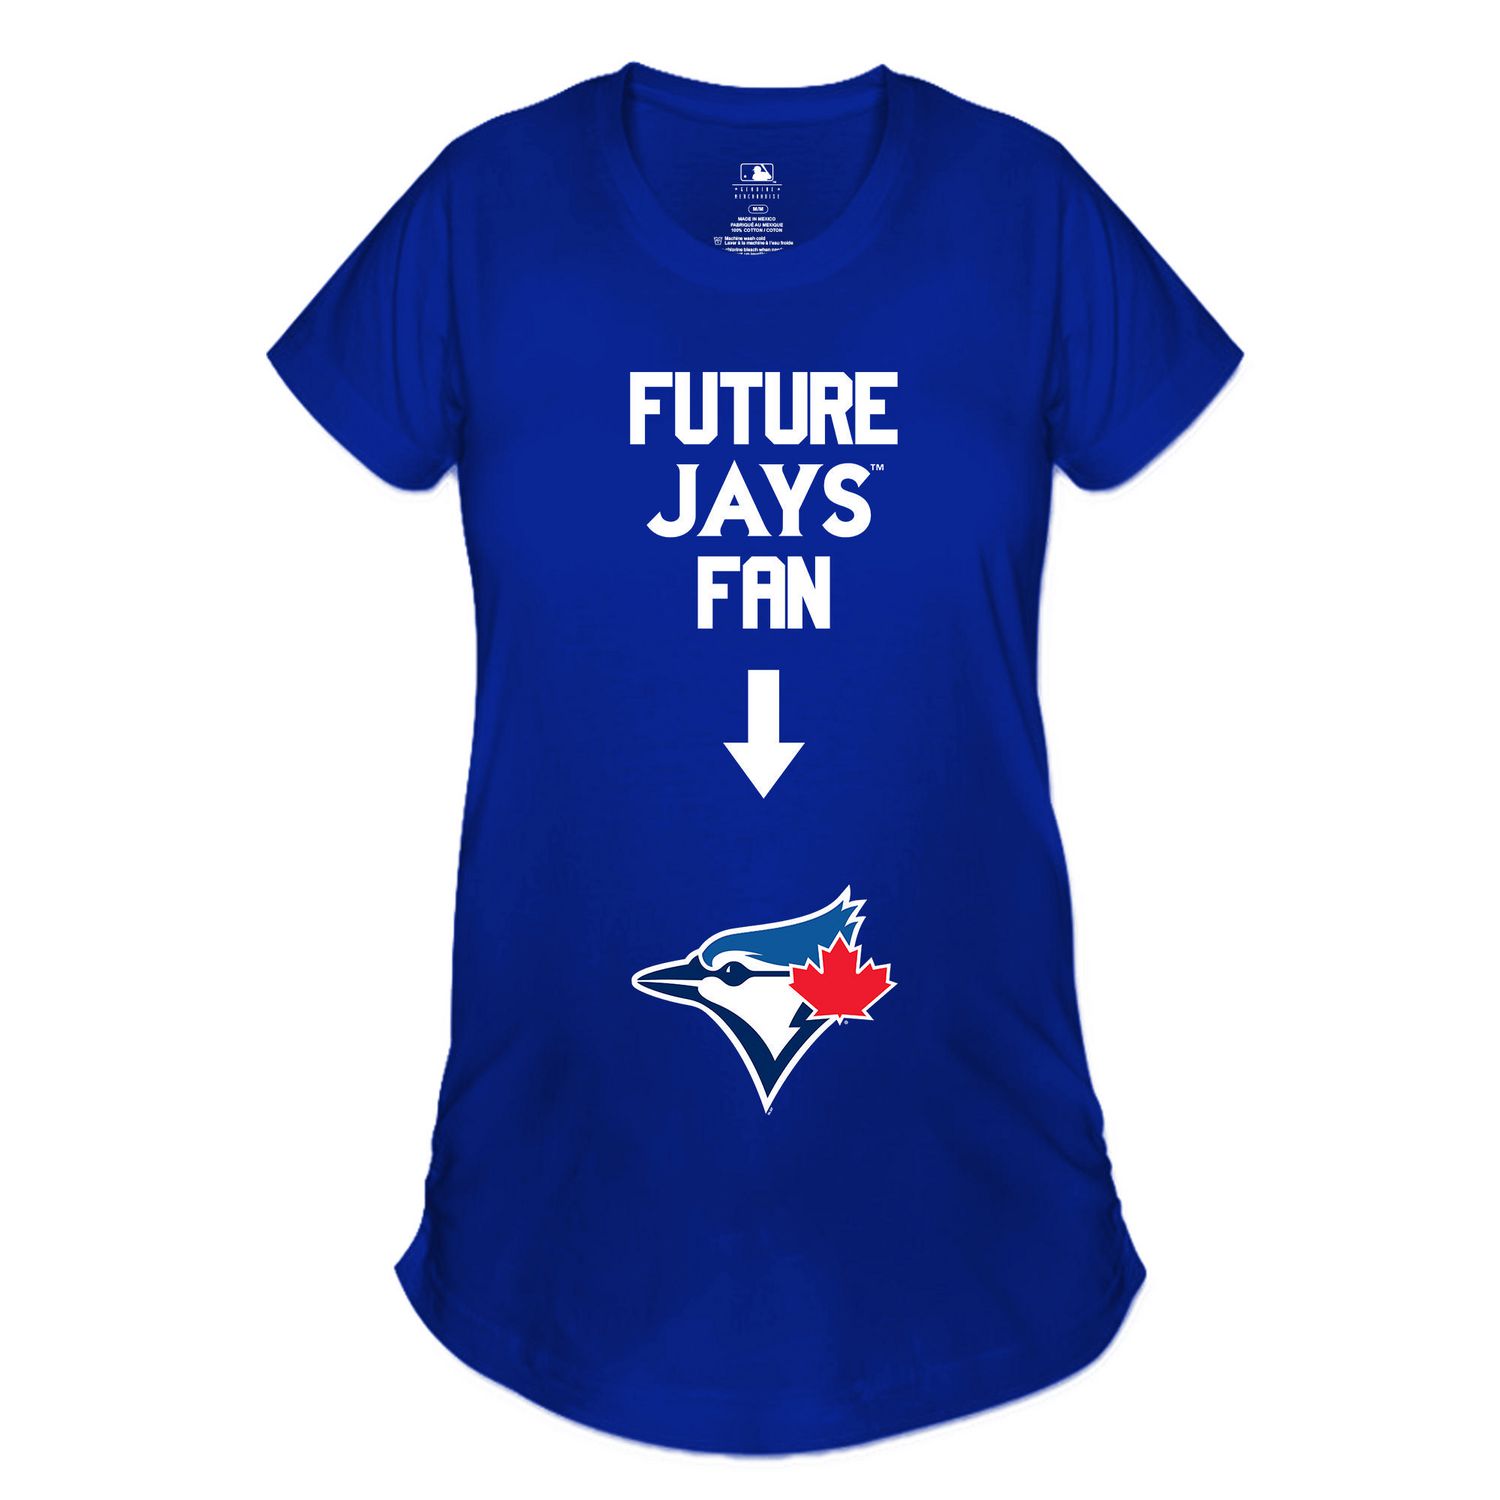 Find more New Price!! Blue Jays Maternity Shirt. Size Small. for sale at up  to 90% off